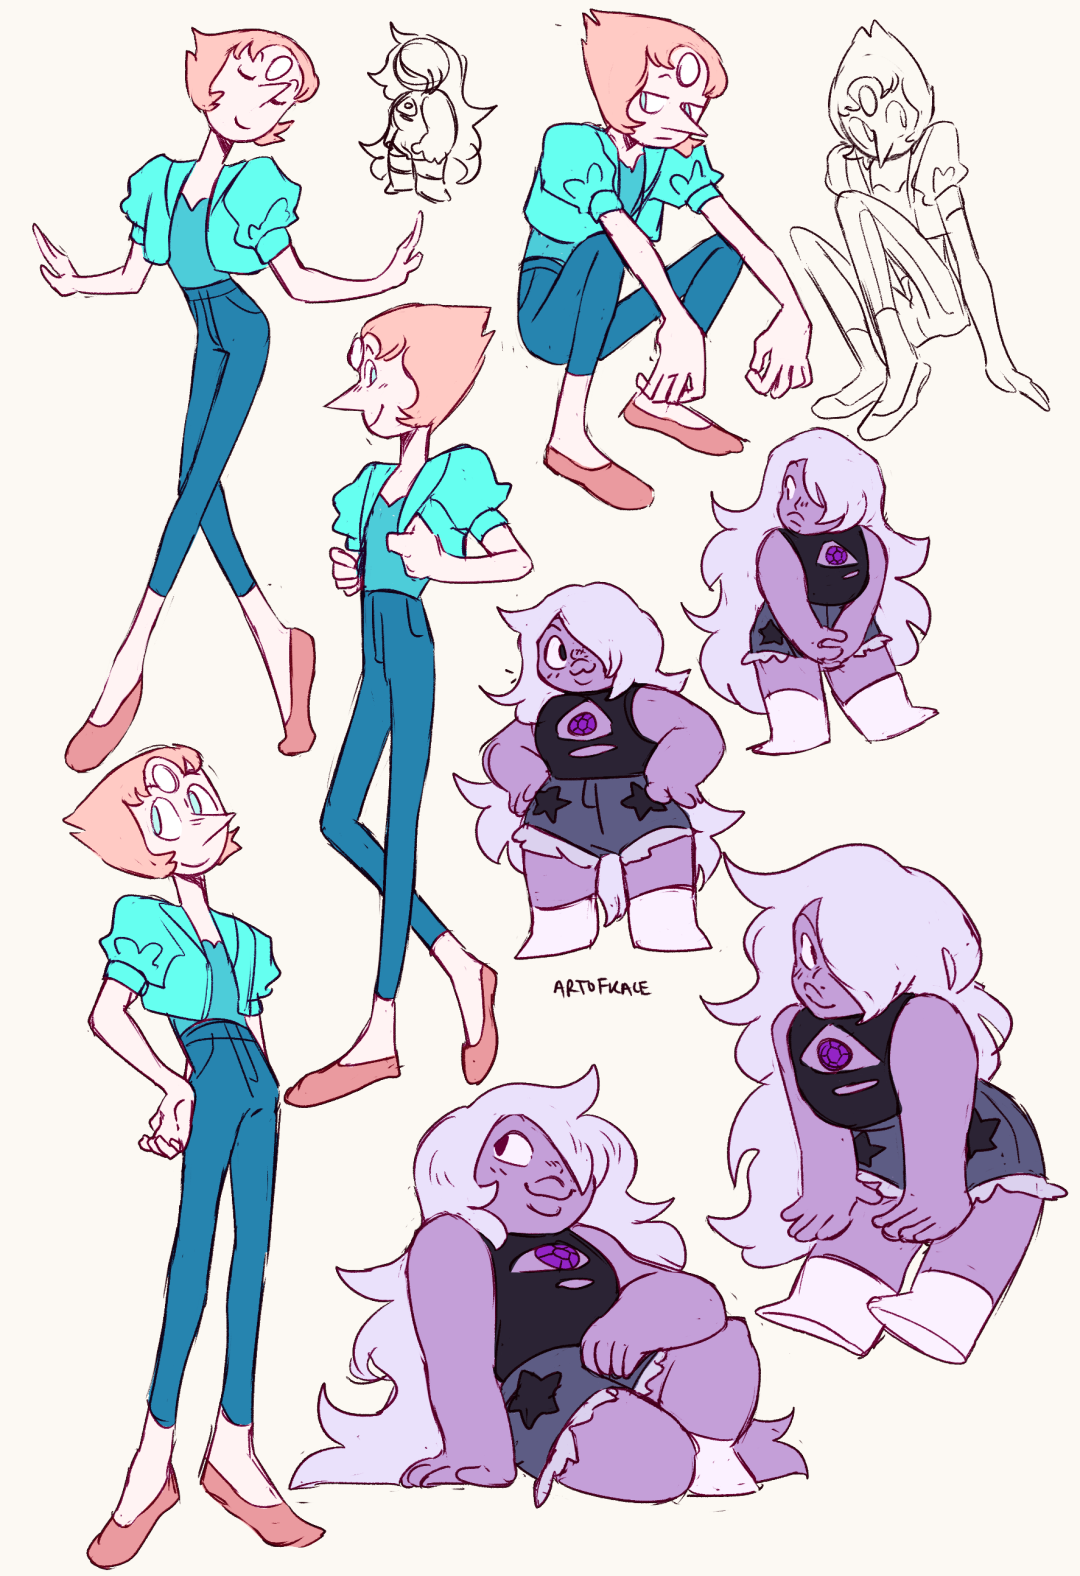 drawing in this style feels so natural ;w; (i drew Garnet too but she gets her own page)